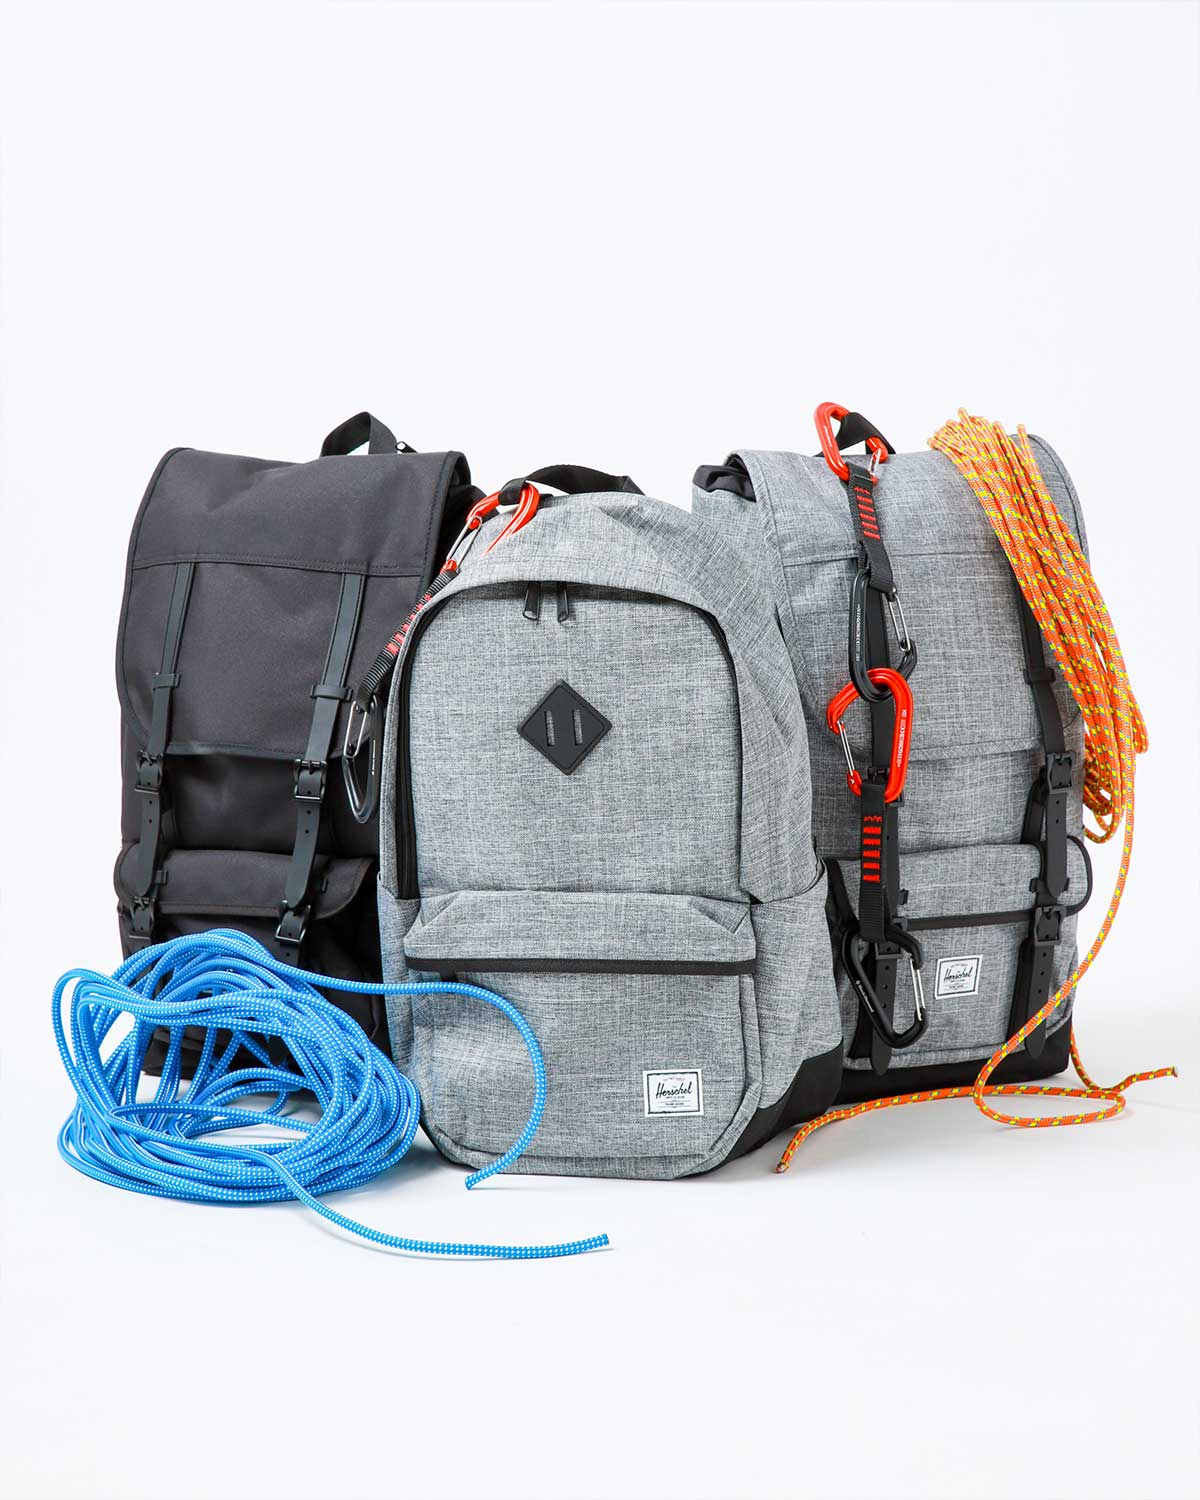 Take a look at the Herschel Pro Series